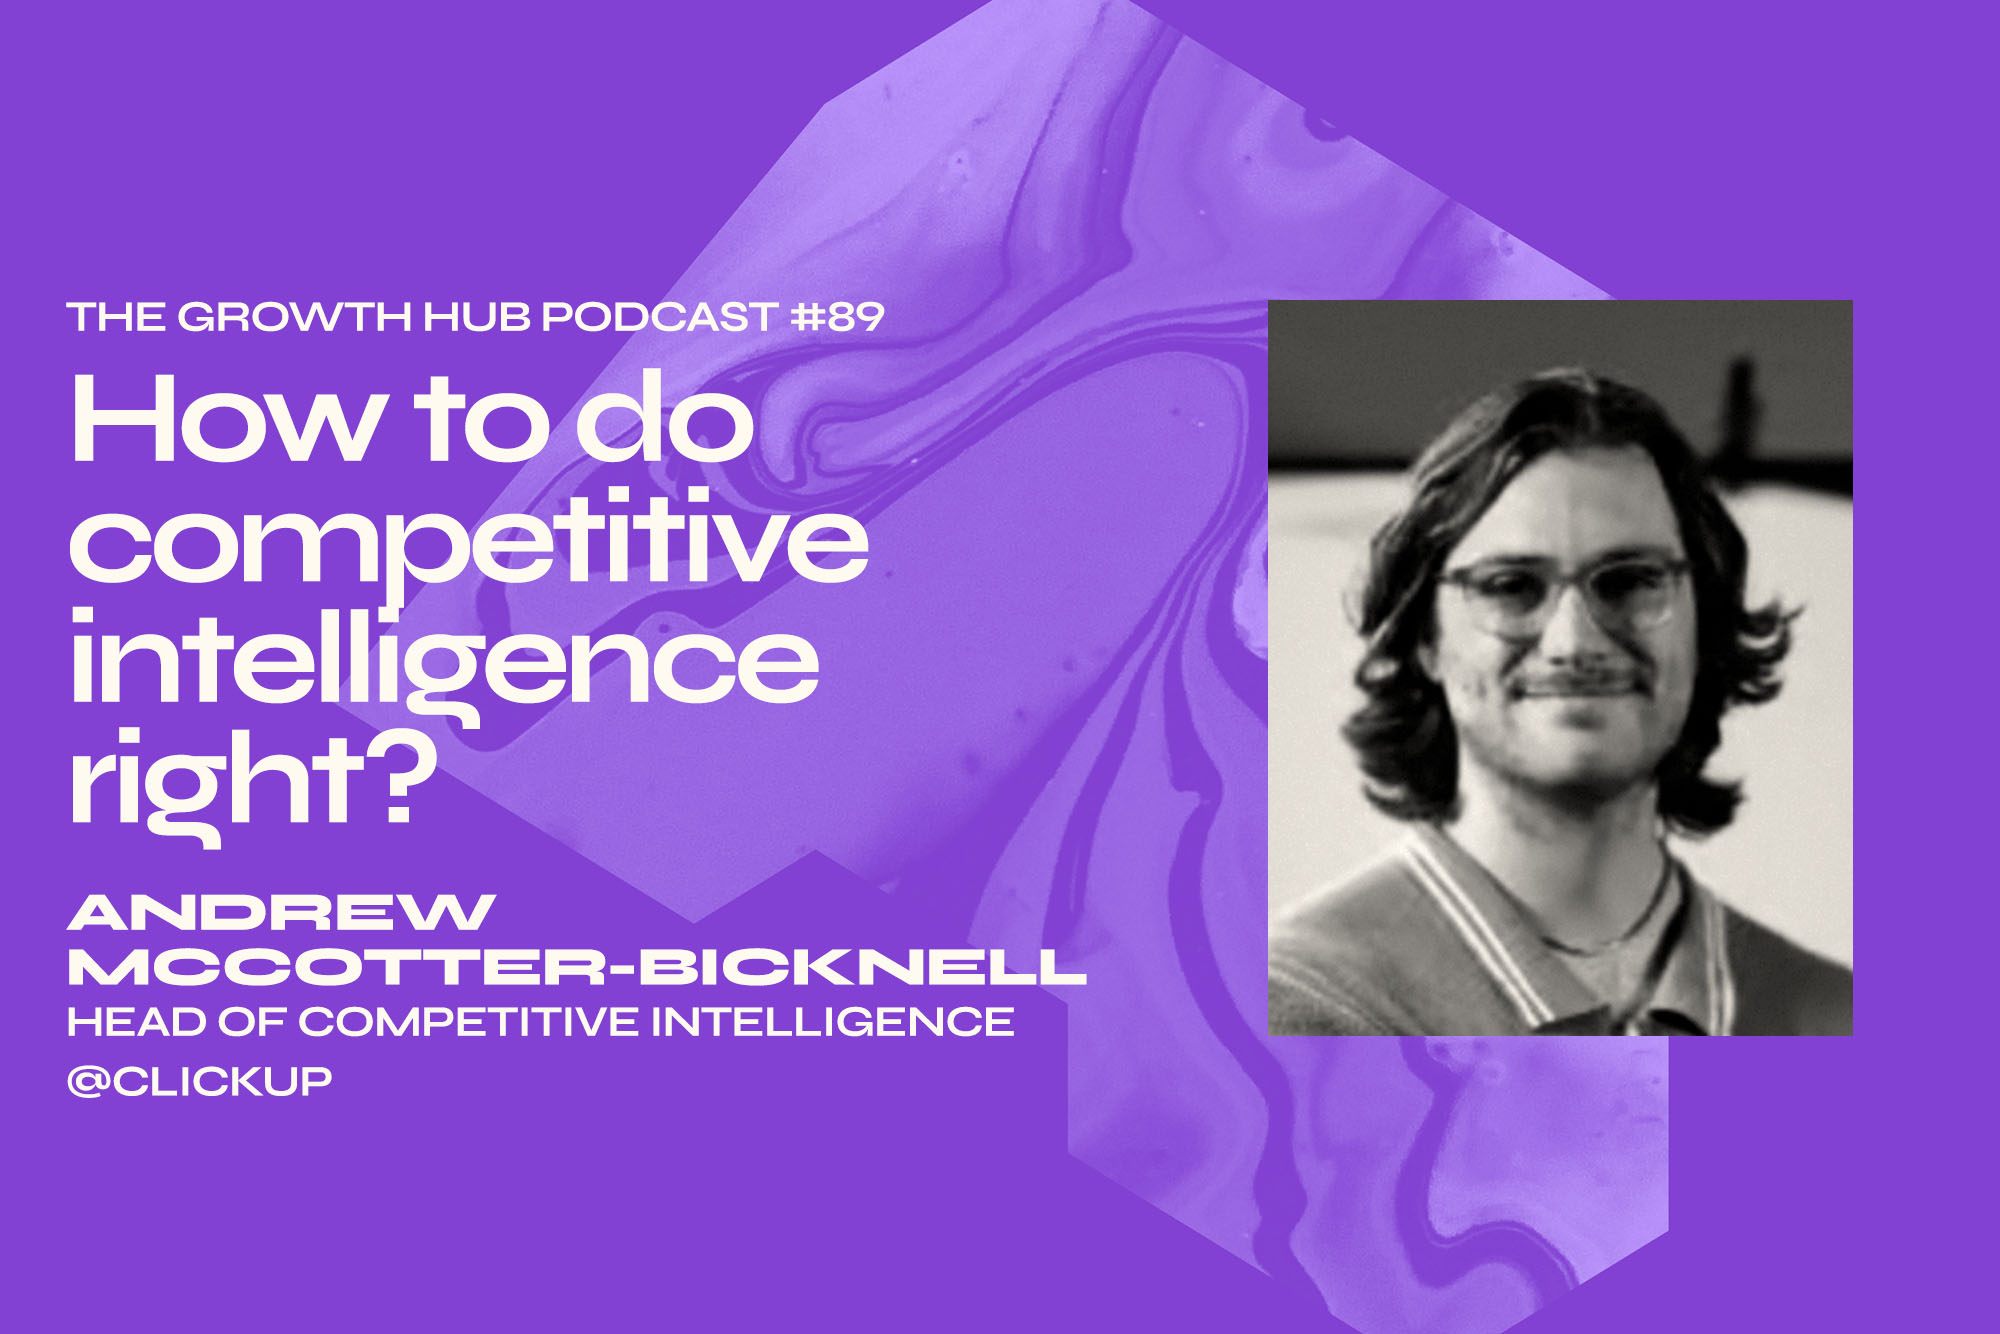 [Podcast] What is competitive intelligence and how to do it right?